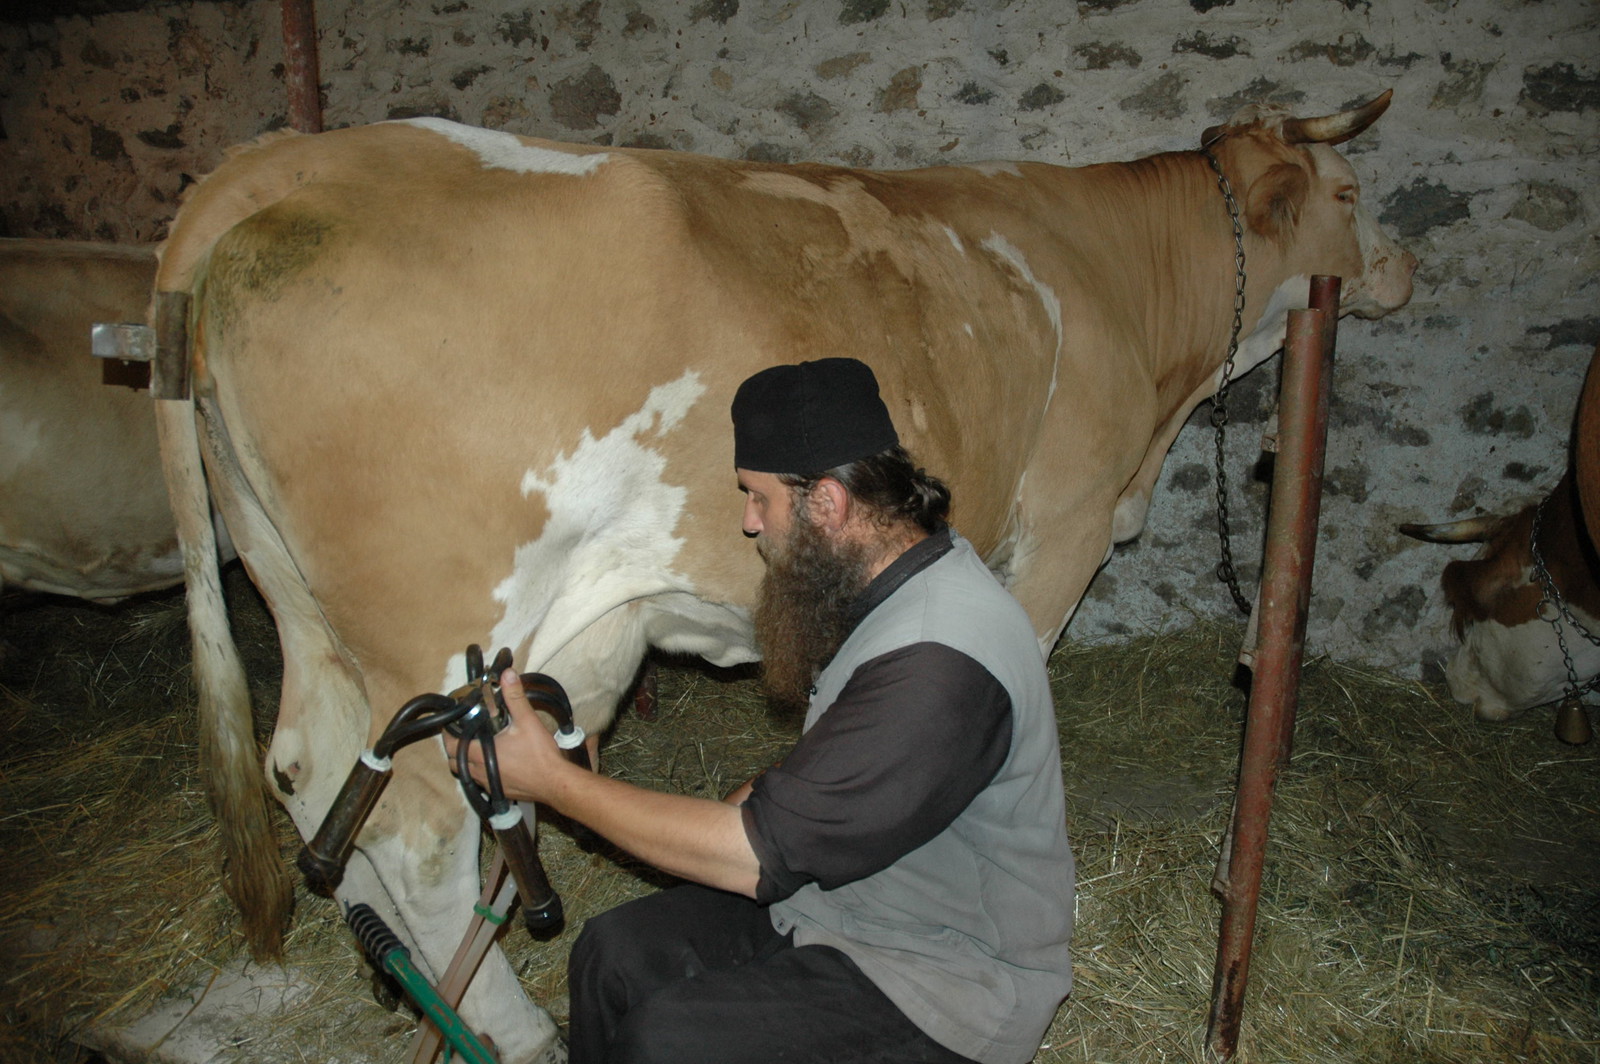 Milking the cows 18